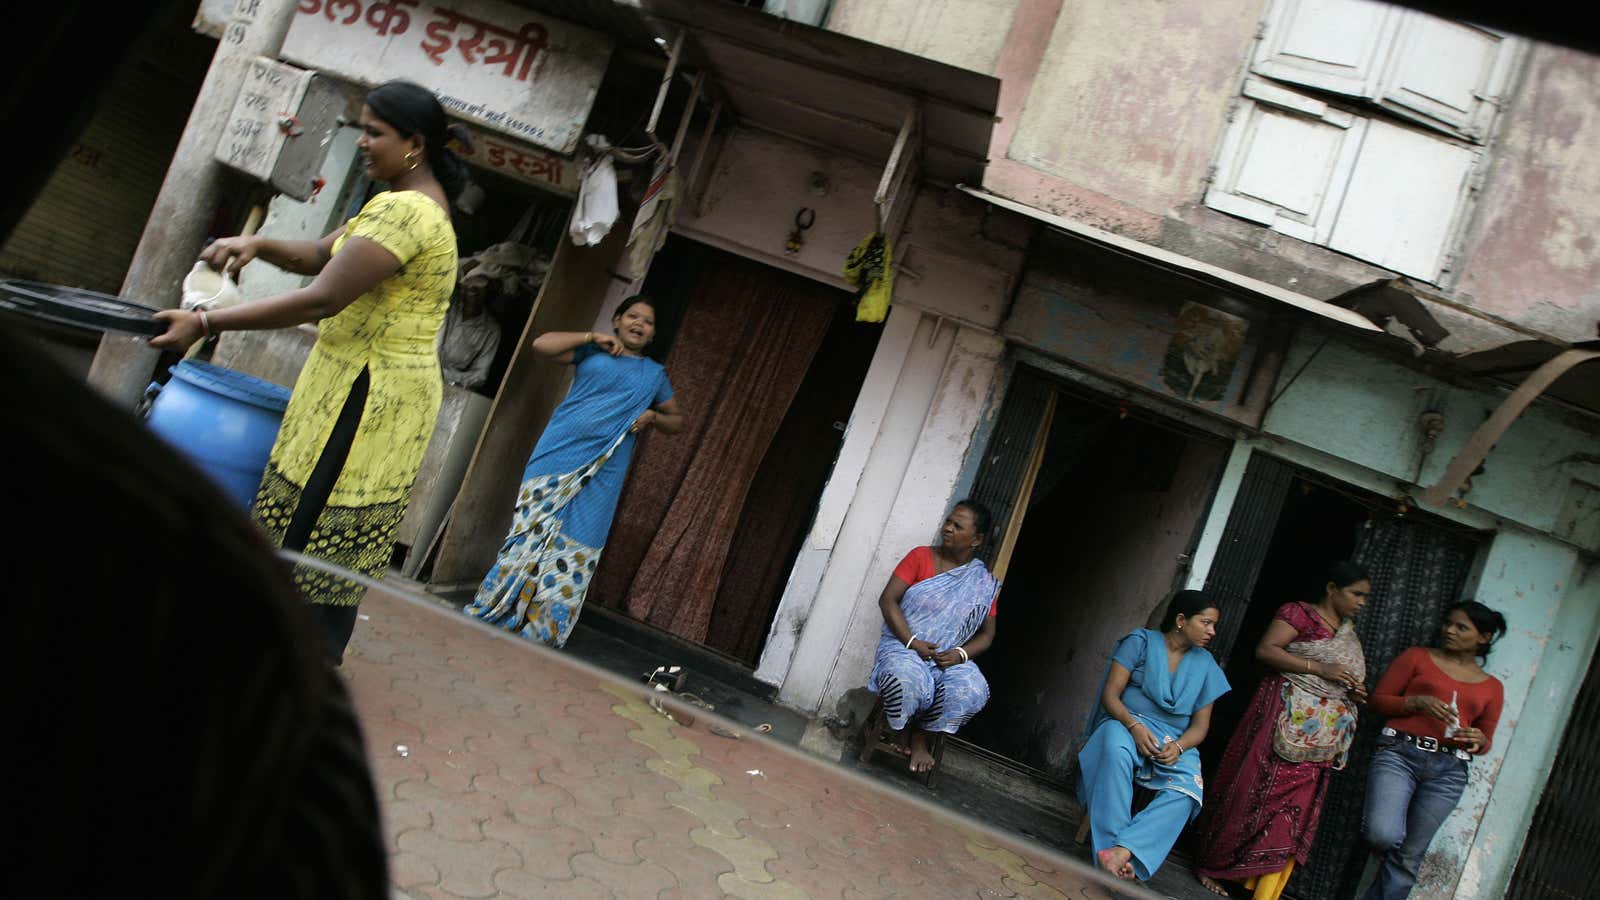 Sex workers at red light area in Mumbai.